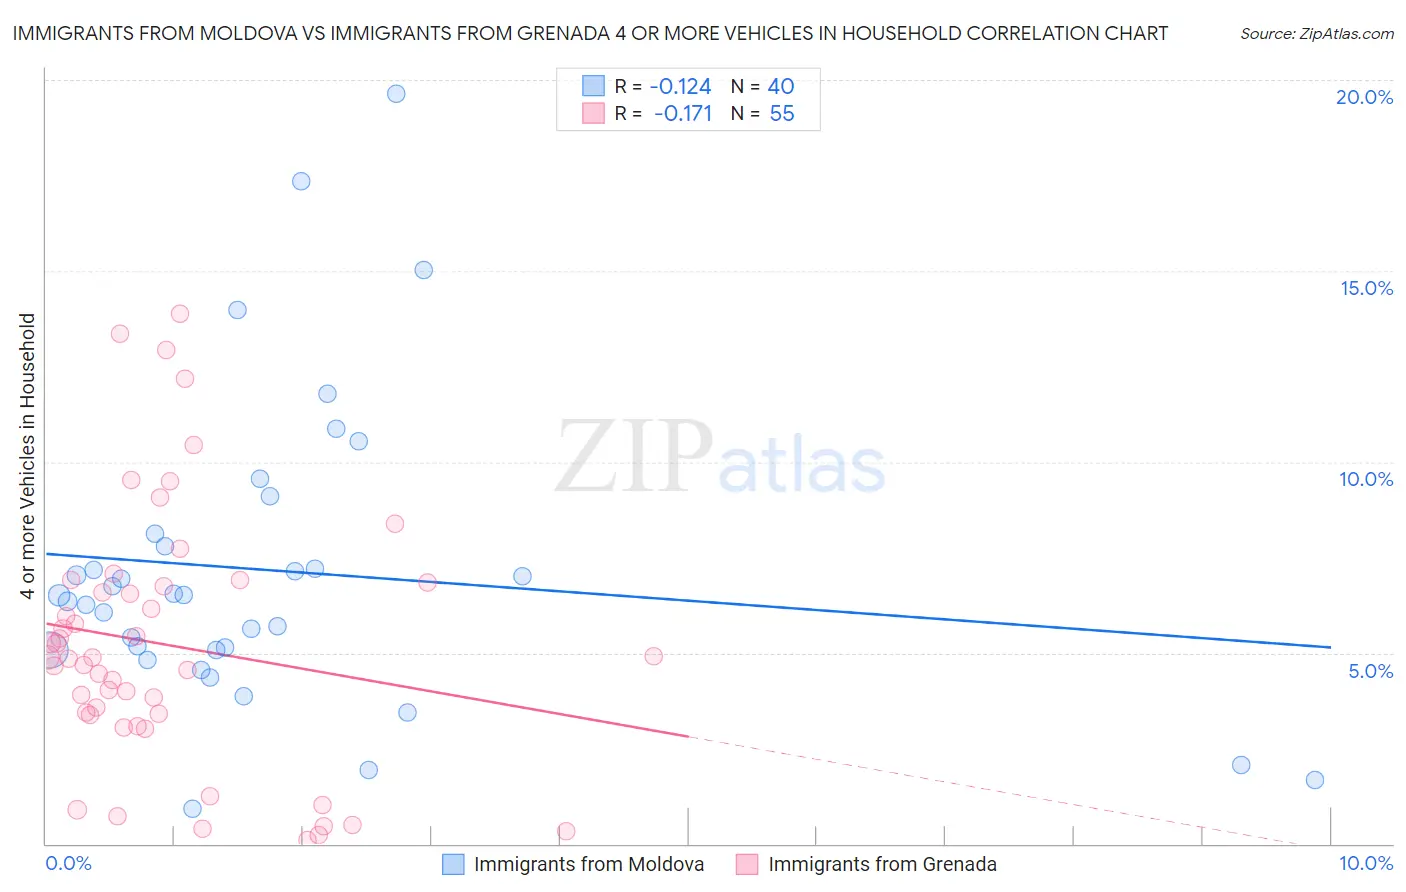 Immigrants from Moldova vs Immigrants from Grenada 4 or more Vehicles in Household